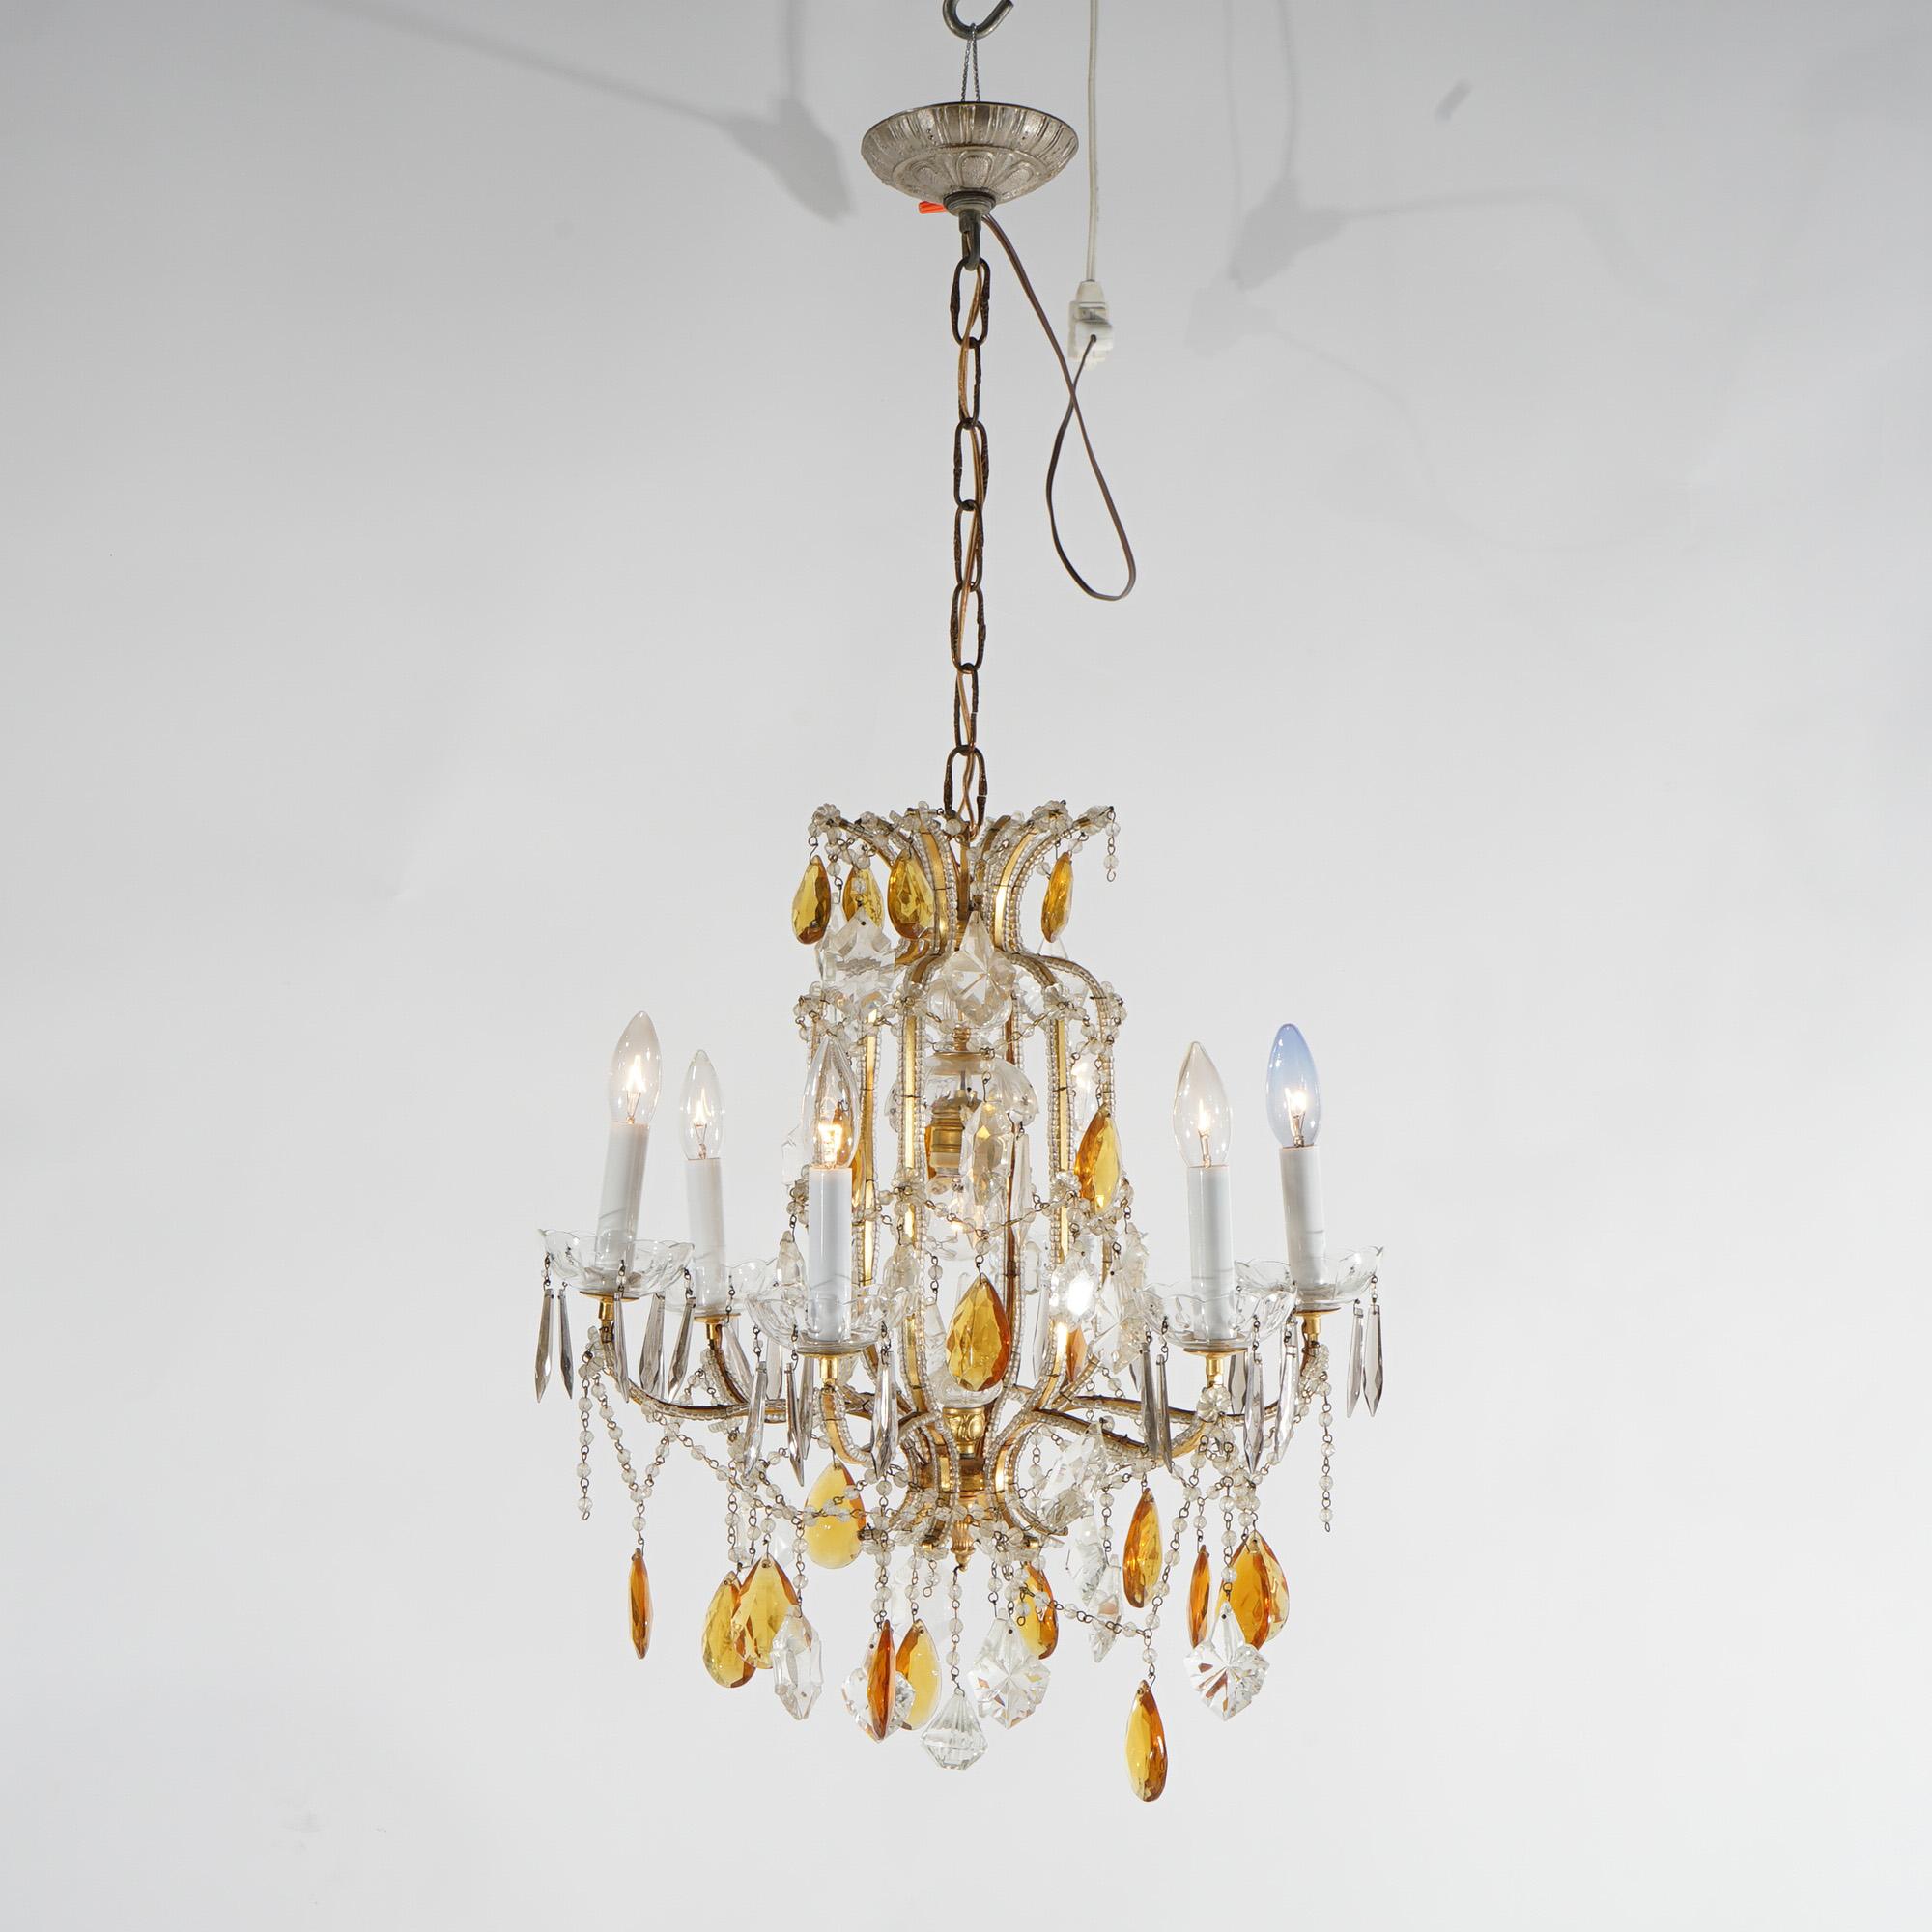 A French Louis XIV style chandelier offers gilt metal scroll form frame with seven candle lights; strung, cut and amber prisms throughout, 20th century

Measures - 37